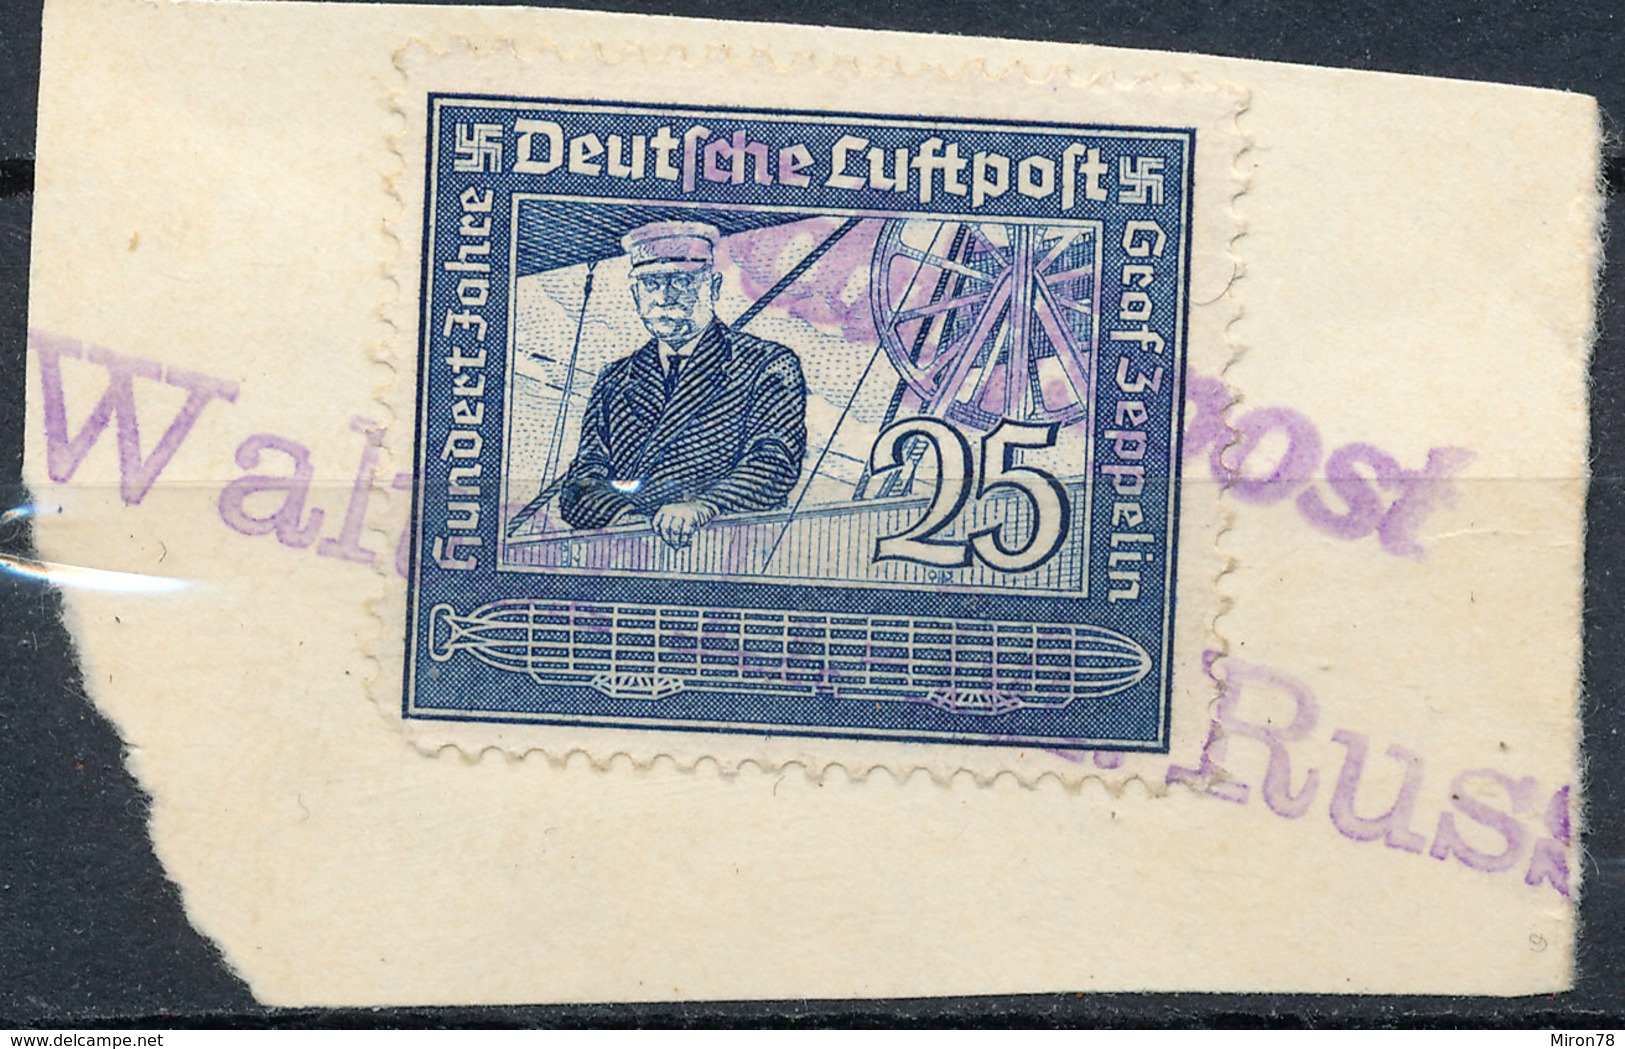 Stamp Germany Airmail Zeppelin 1938 Used Lot#10 - Airmail & Zeppelin